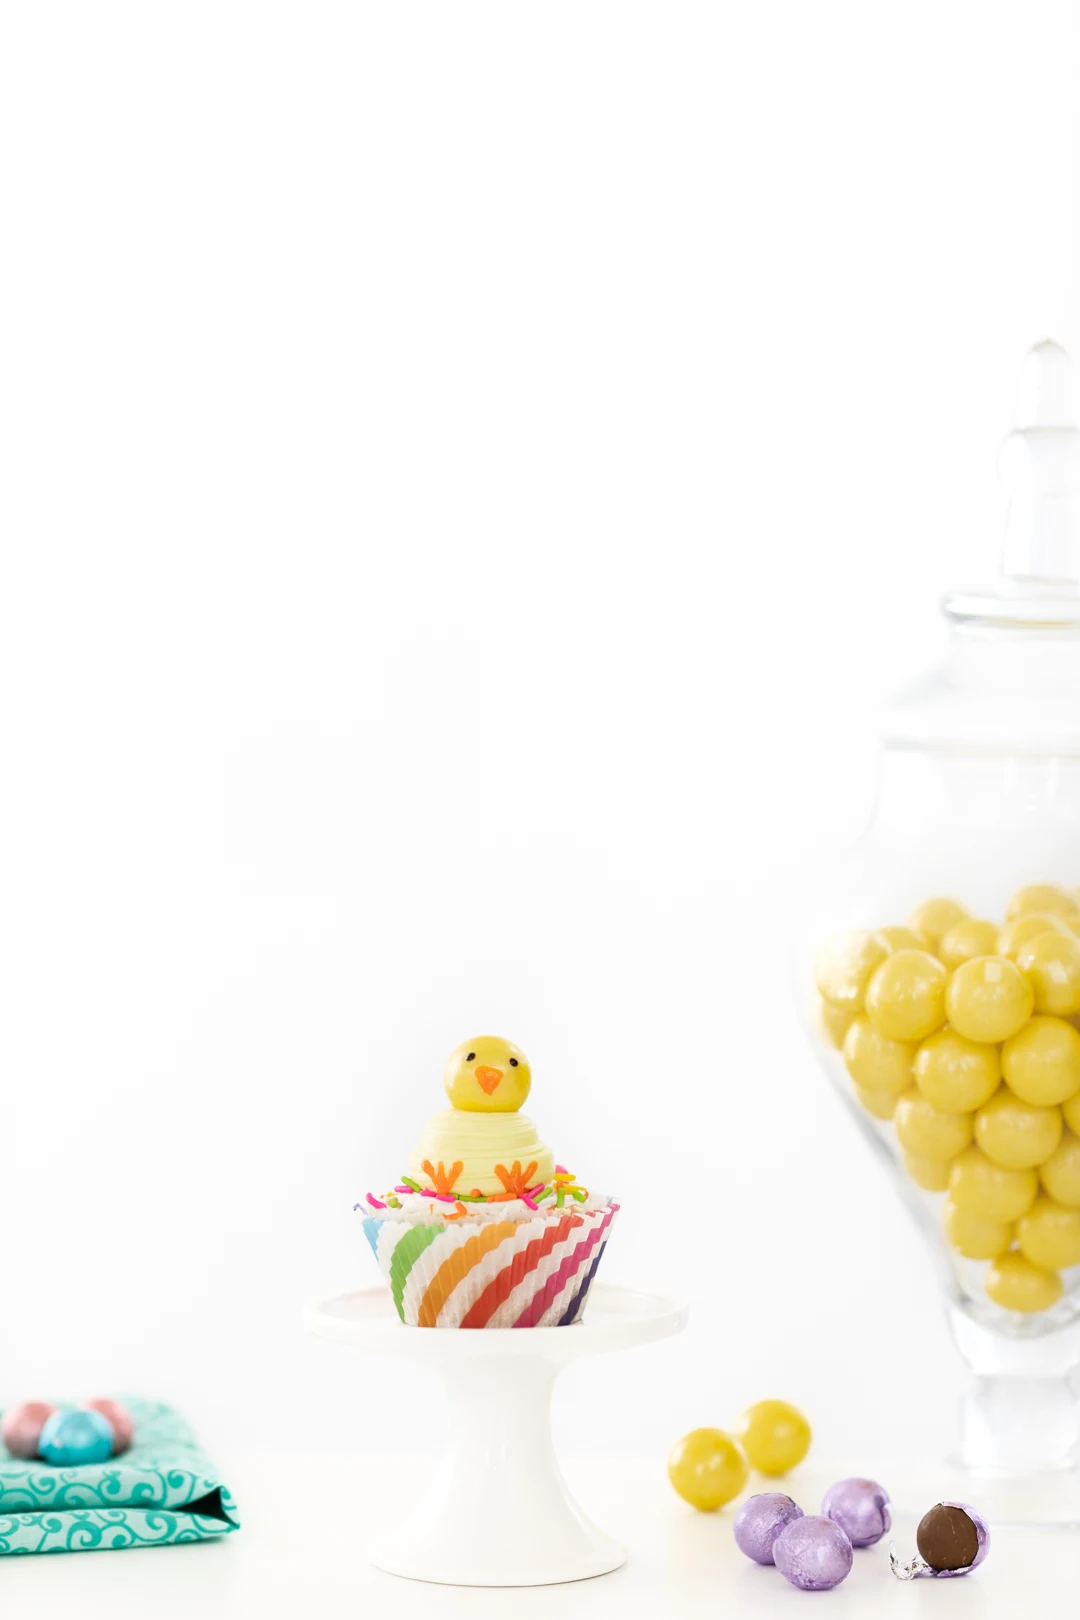 fun easter chick cupcake with gumballs and candy